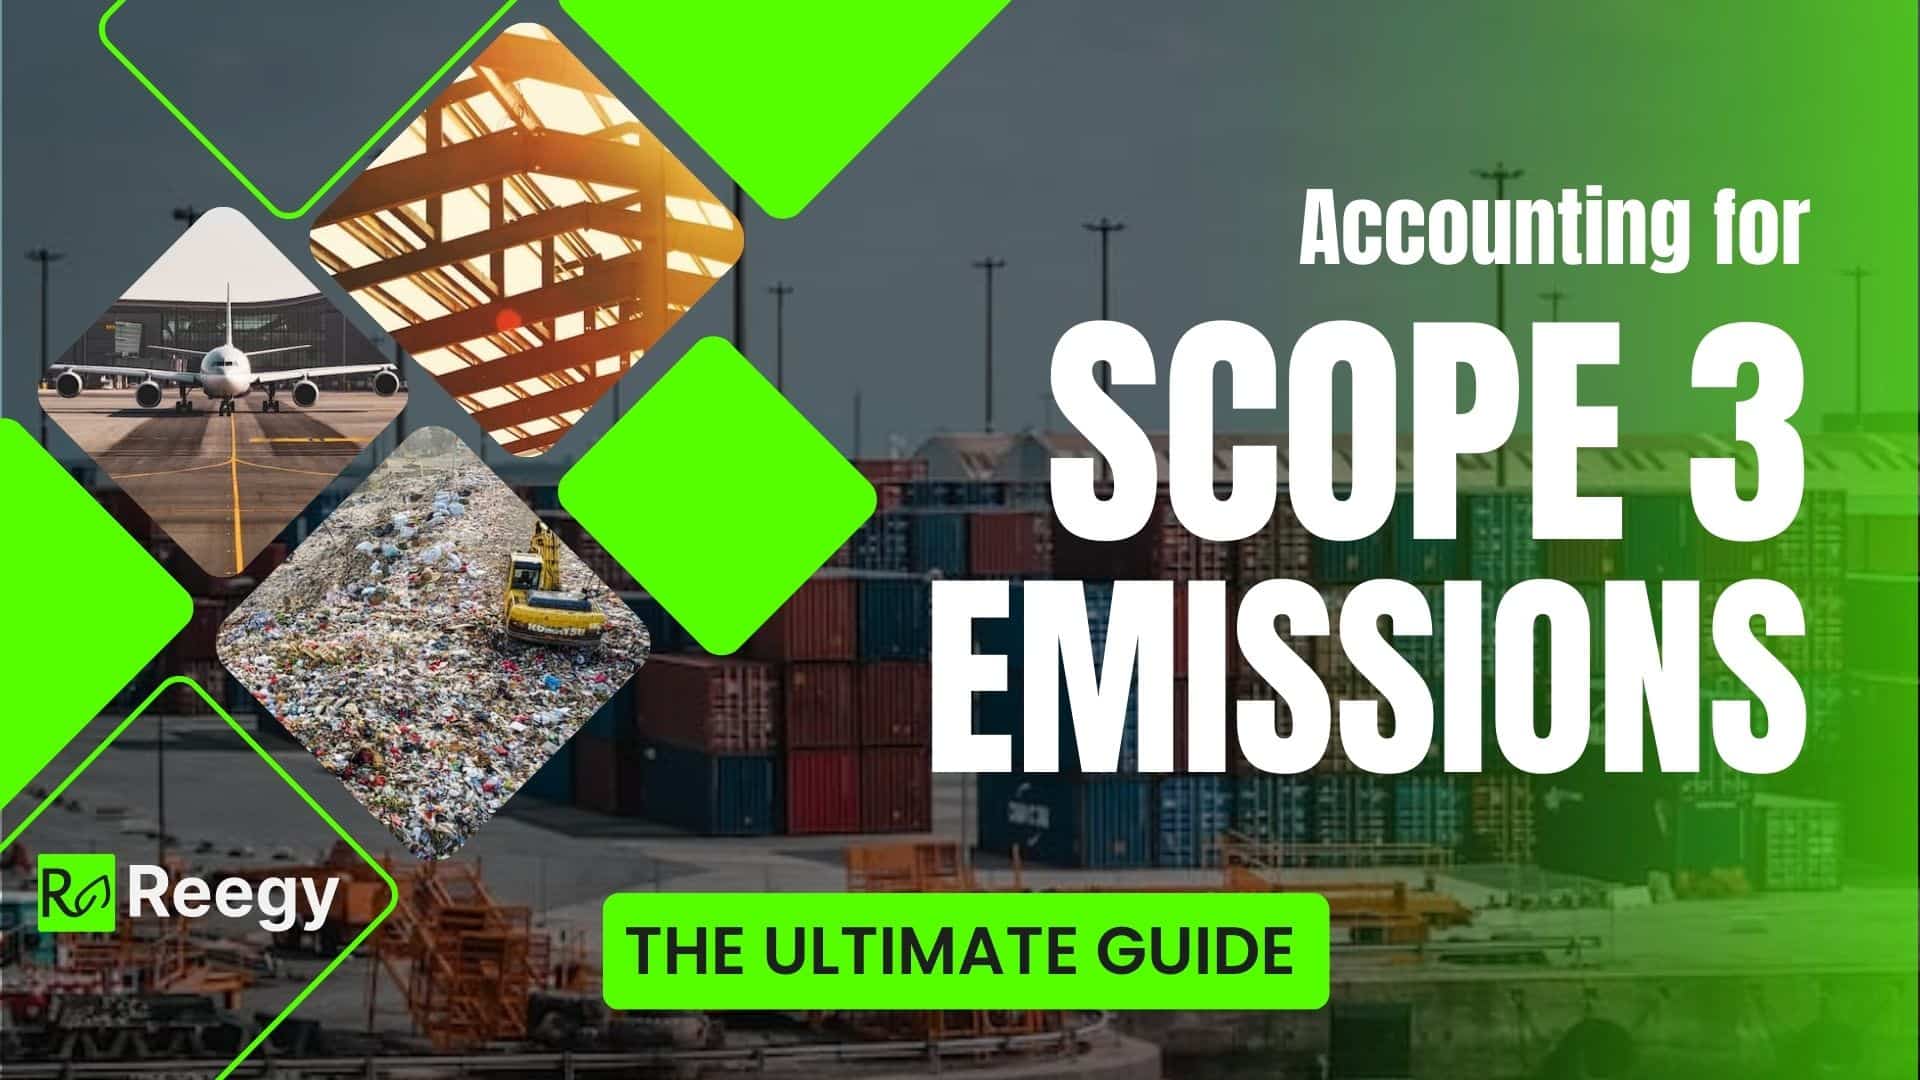 Scope 3 Emissions in Carbon Accounting